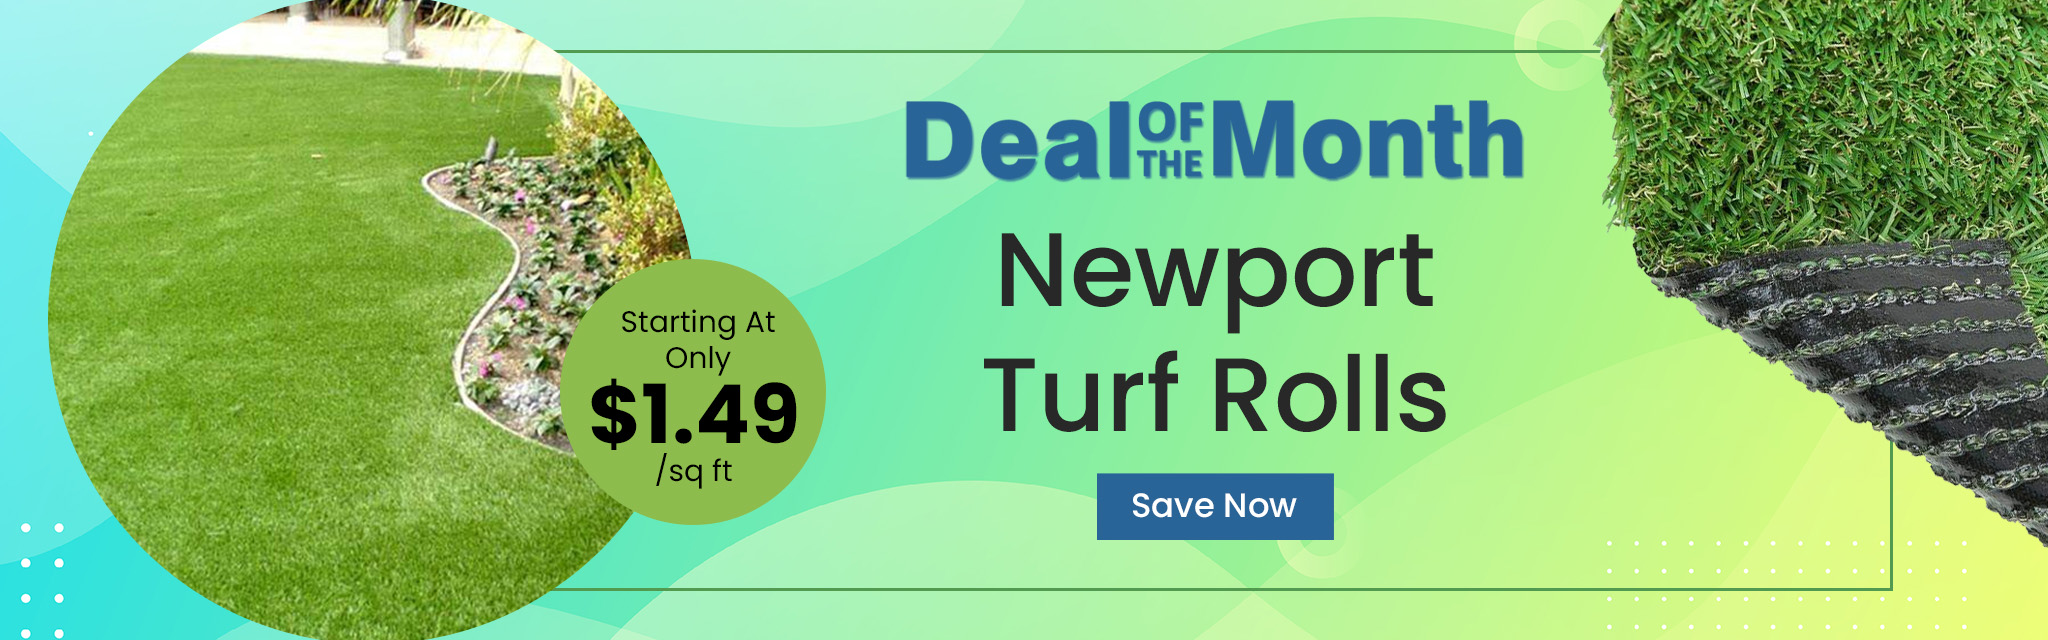 Deal Of The Month. Newport Turf Rolls. Starting At Only $1.49 per square feet. Save Now